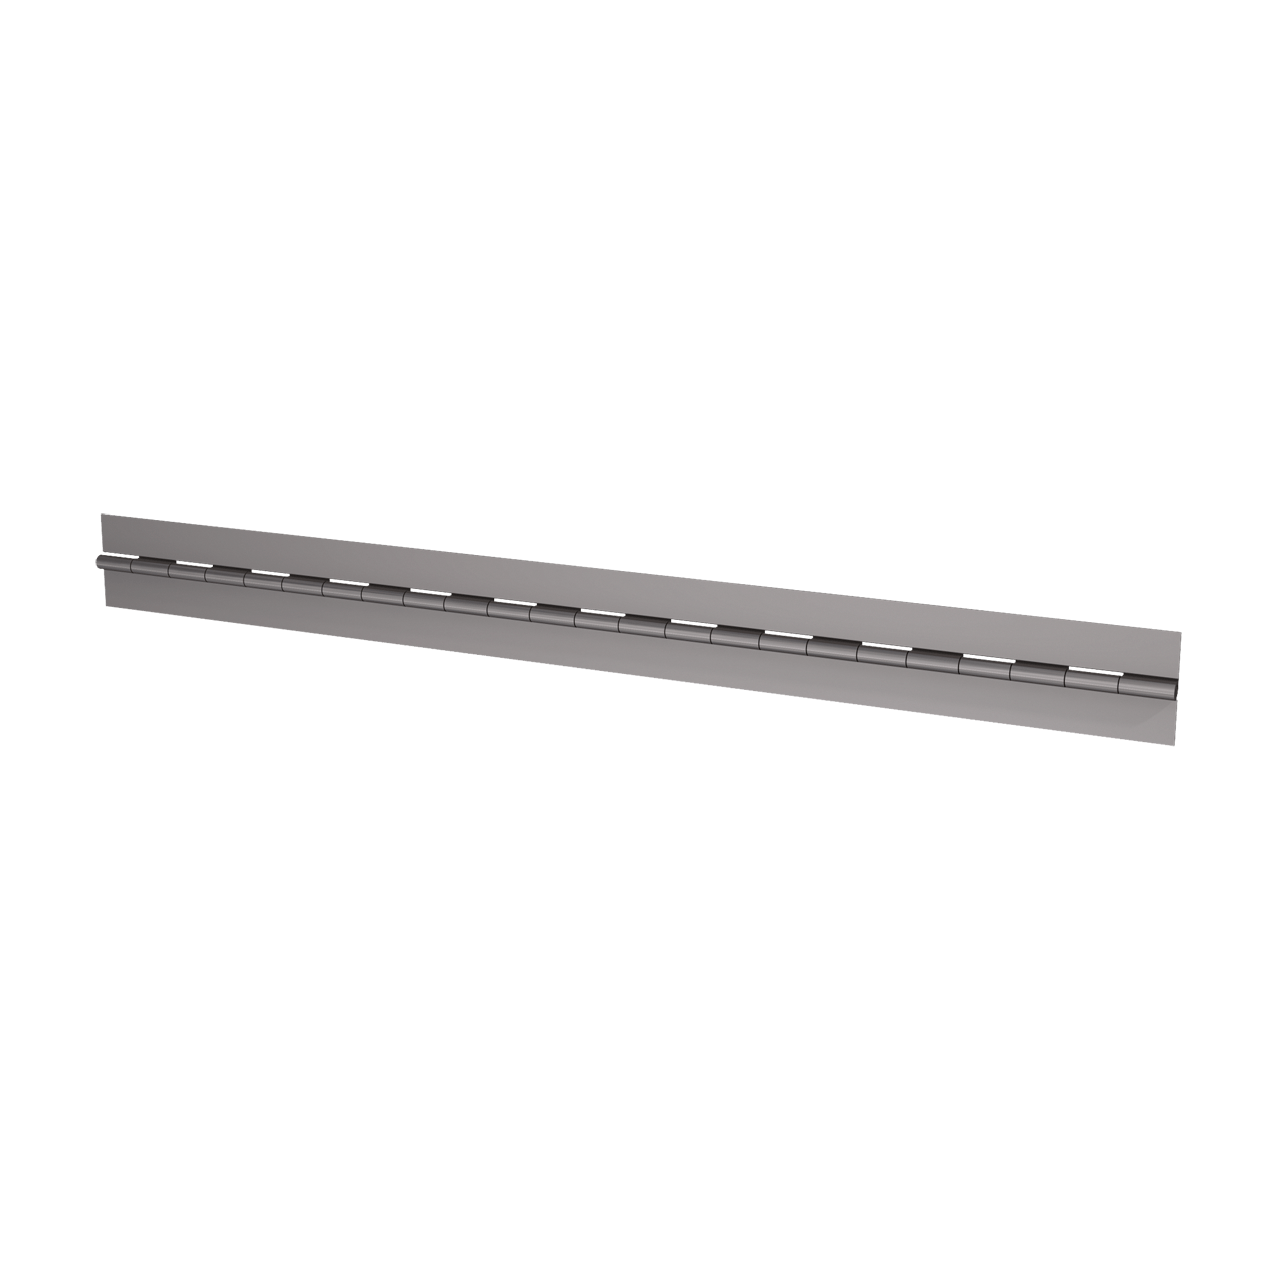 Steel Continuous hinge - 0.03" x 1.06" x 72", Bare Metal